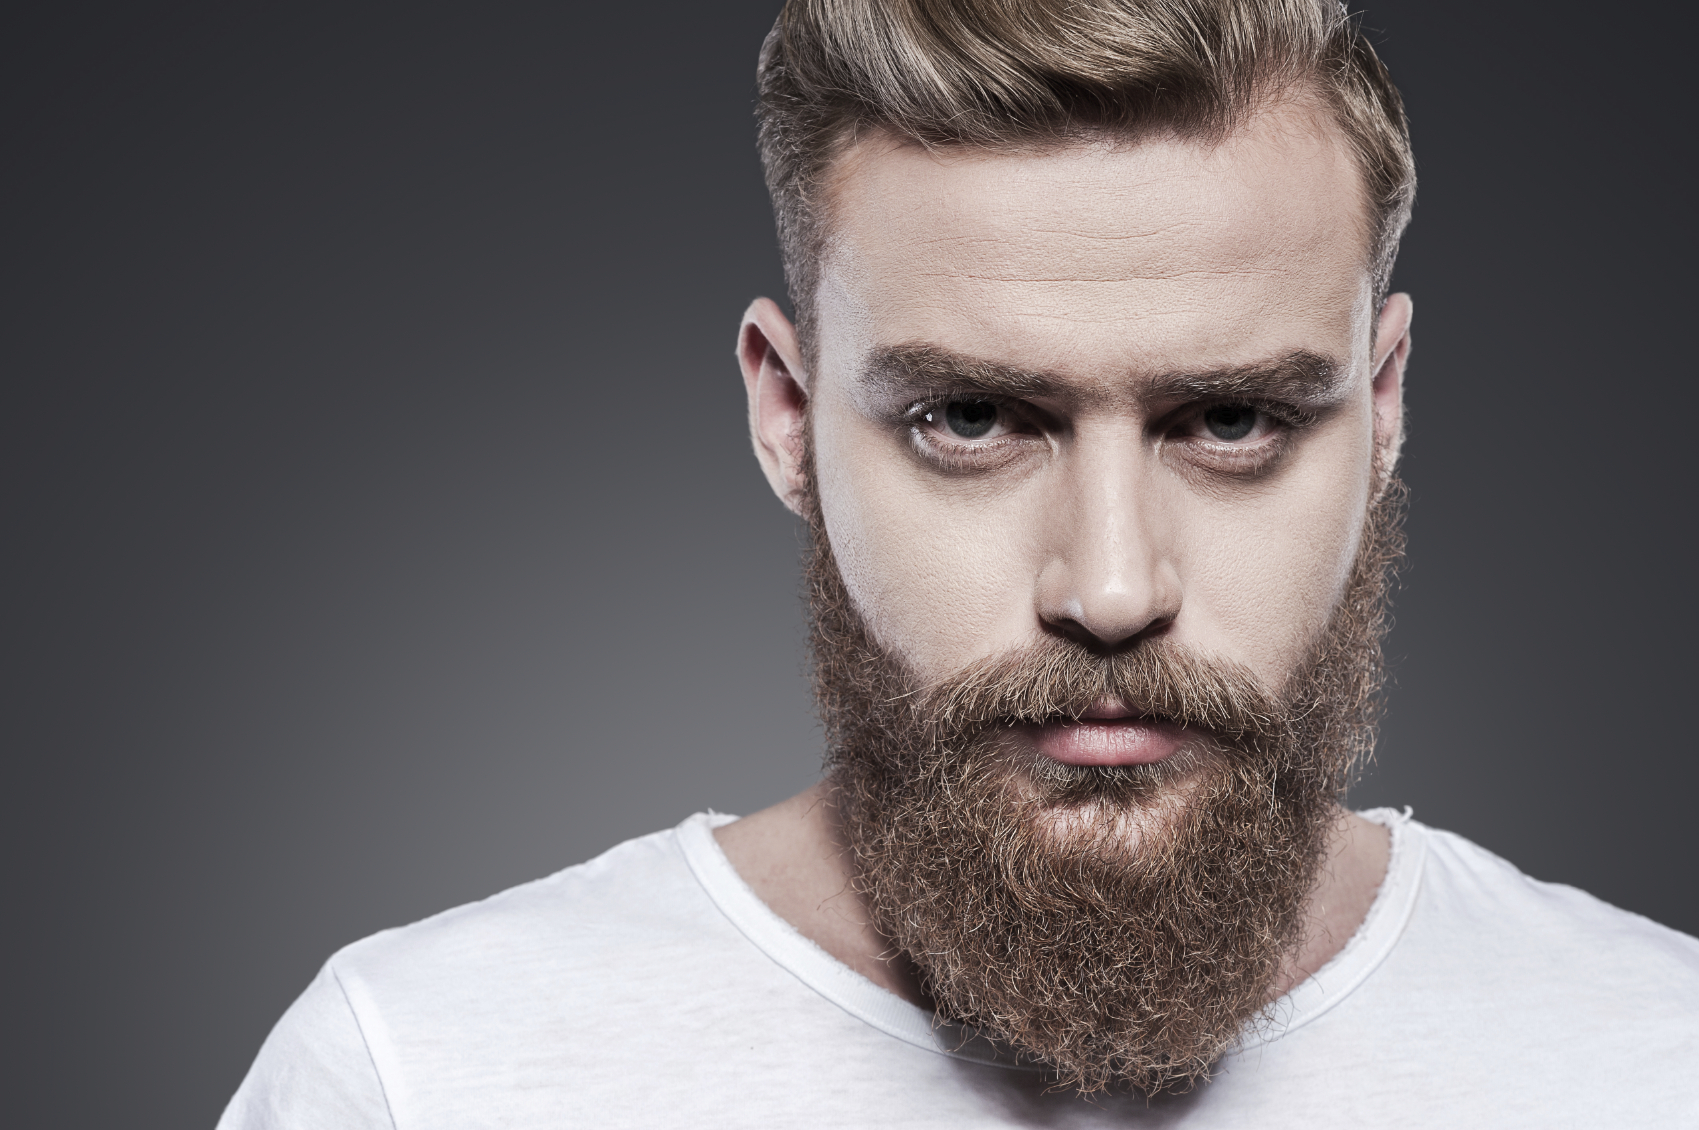 What is the best step for better beard care?